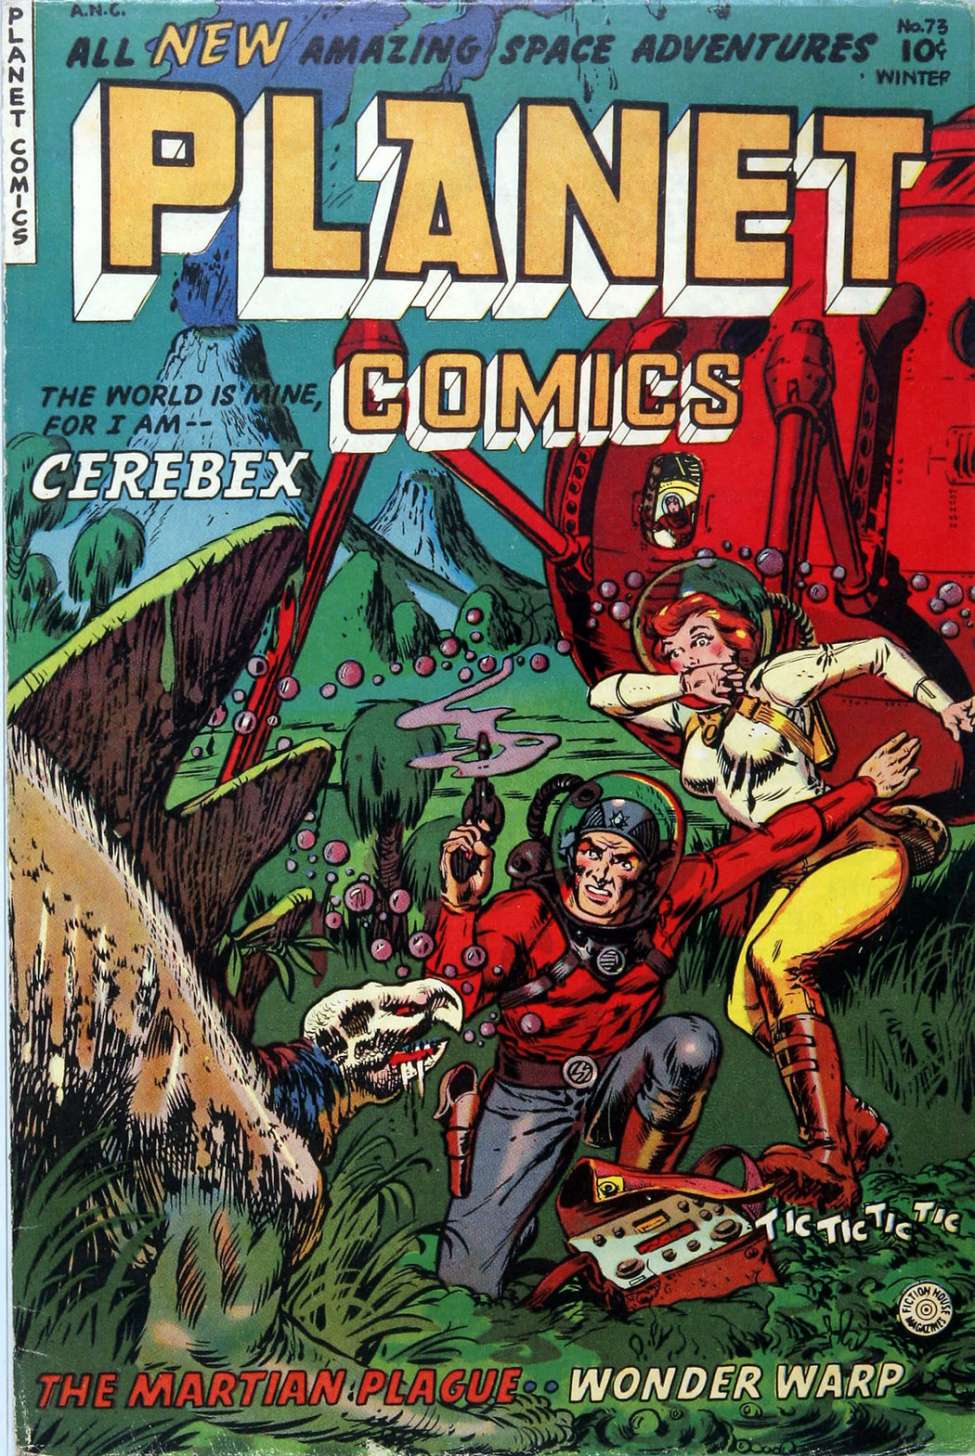 Book Cover For Planet Comics 73 - Version 2